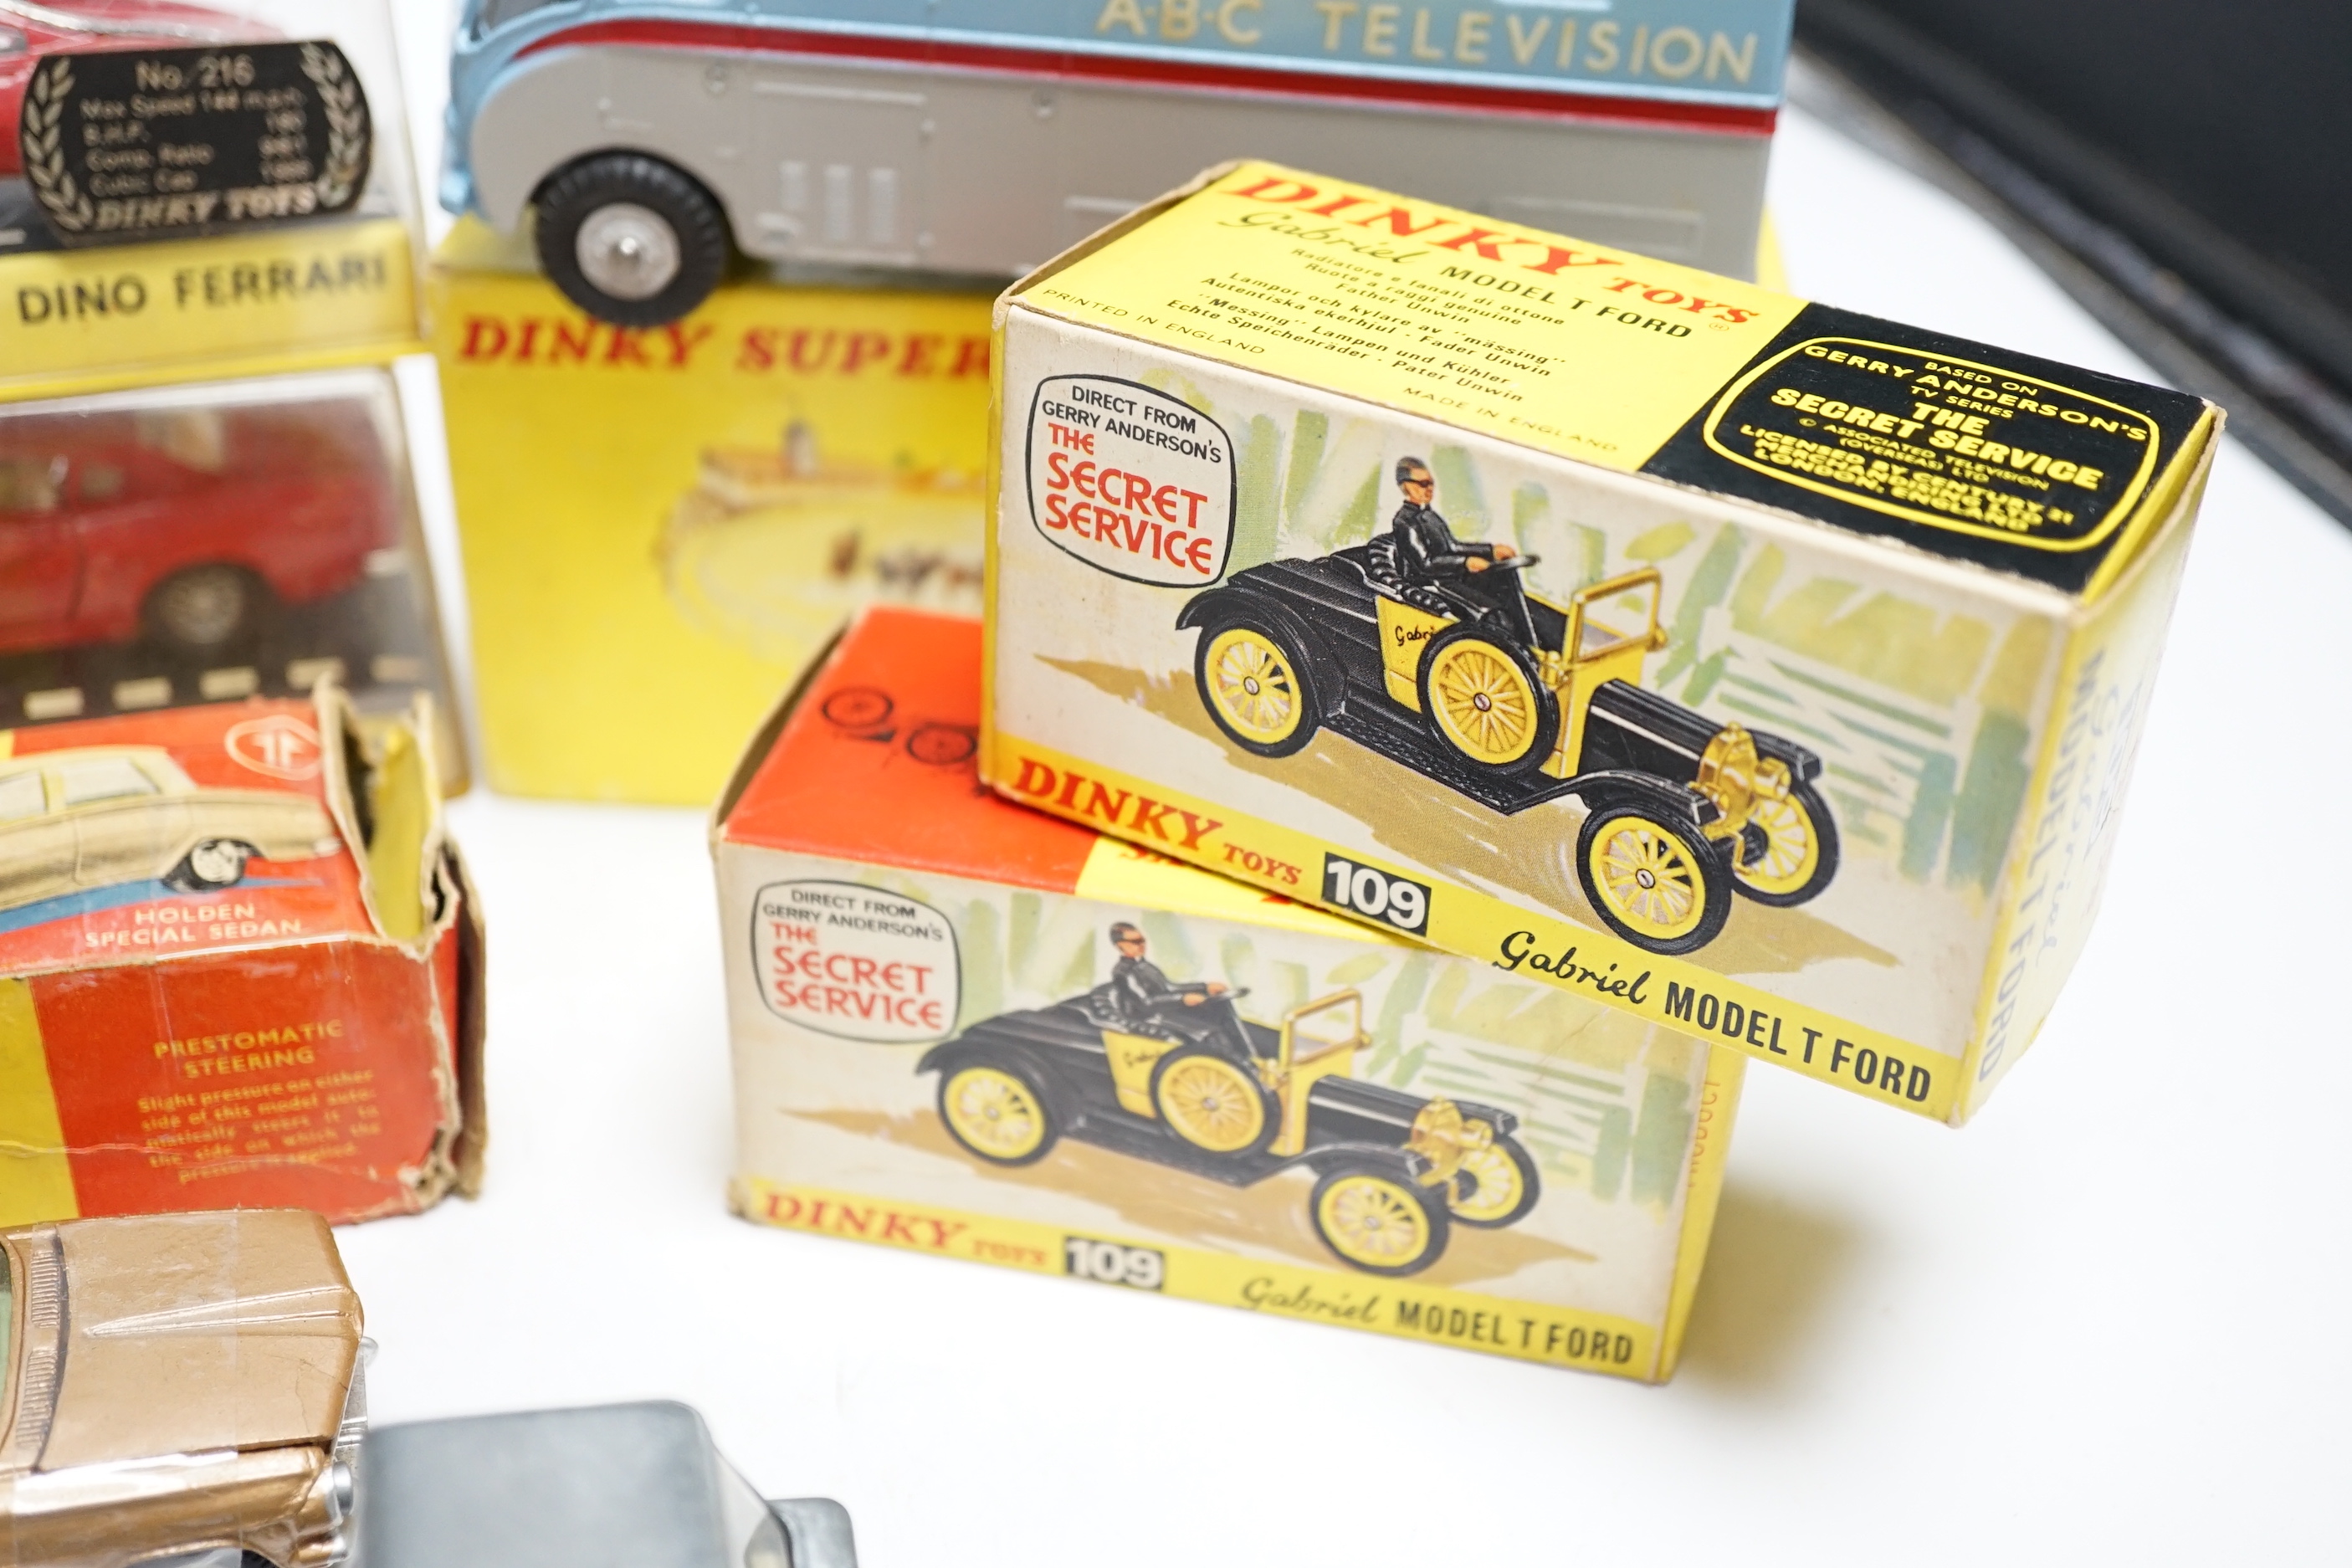 Eight boxed Dinky Toys including two (109) Gabriel Model T Fords, (987) ABC TV Mobile Control Room, (200) Matra 630, (116) Volvo 1800S, (216) Ferrari Dino, (196) Holden Special Sedan, (451) Johnston Road Sweeper, plus an